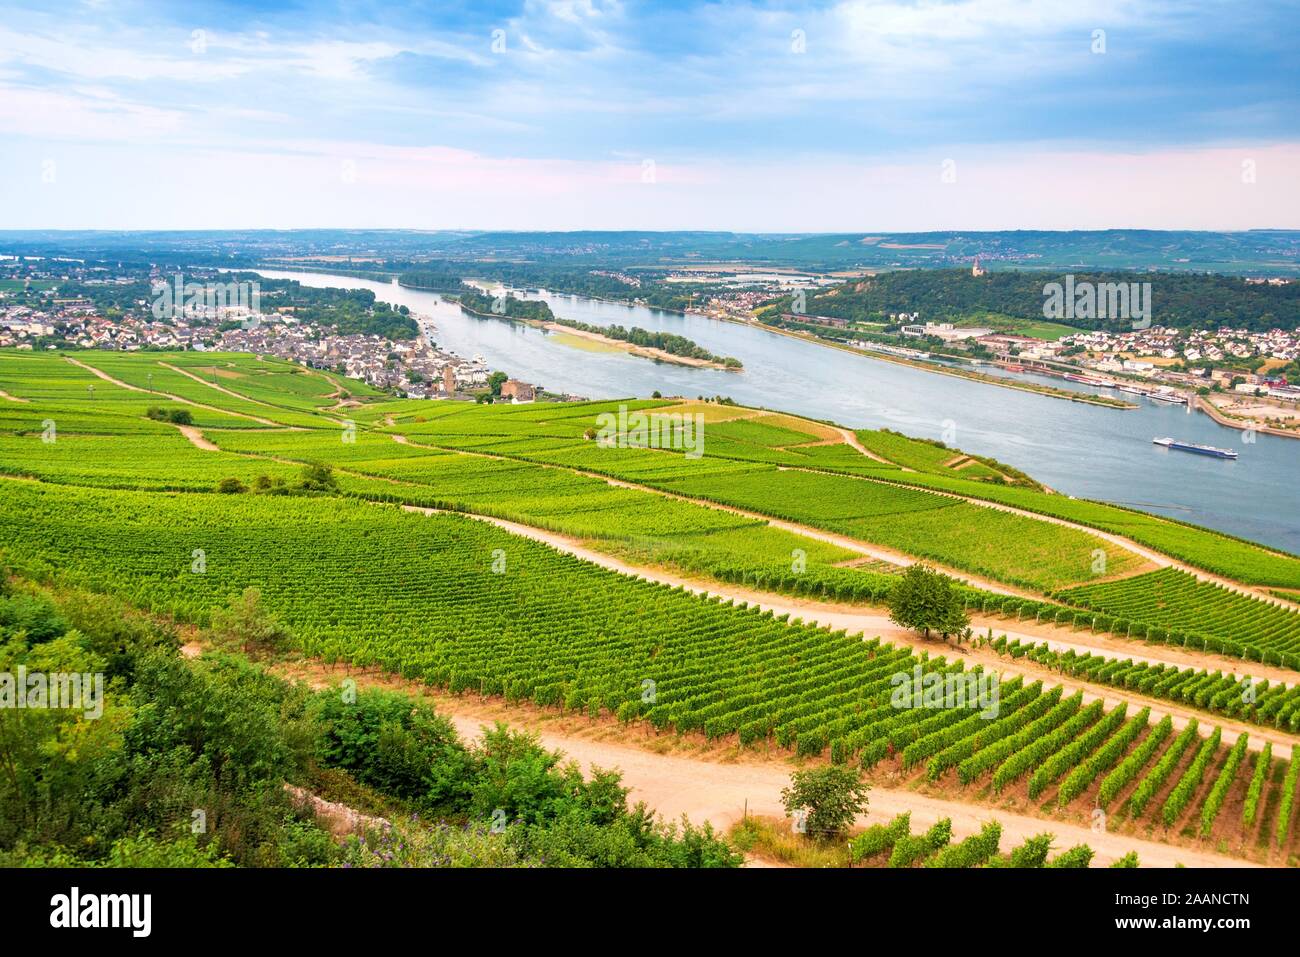 Aerial view of The River Rhine valley with large massives of vineyards alongside. Stock Photo